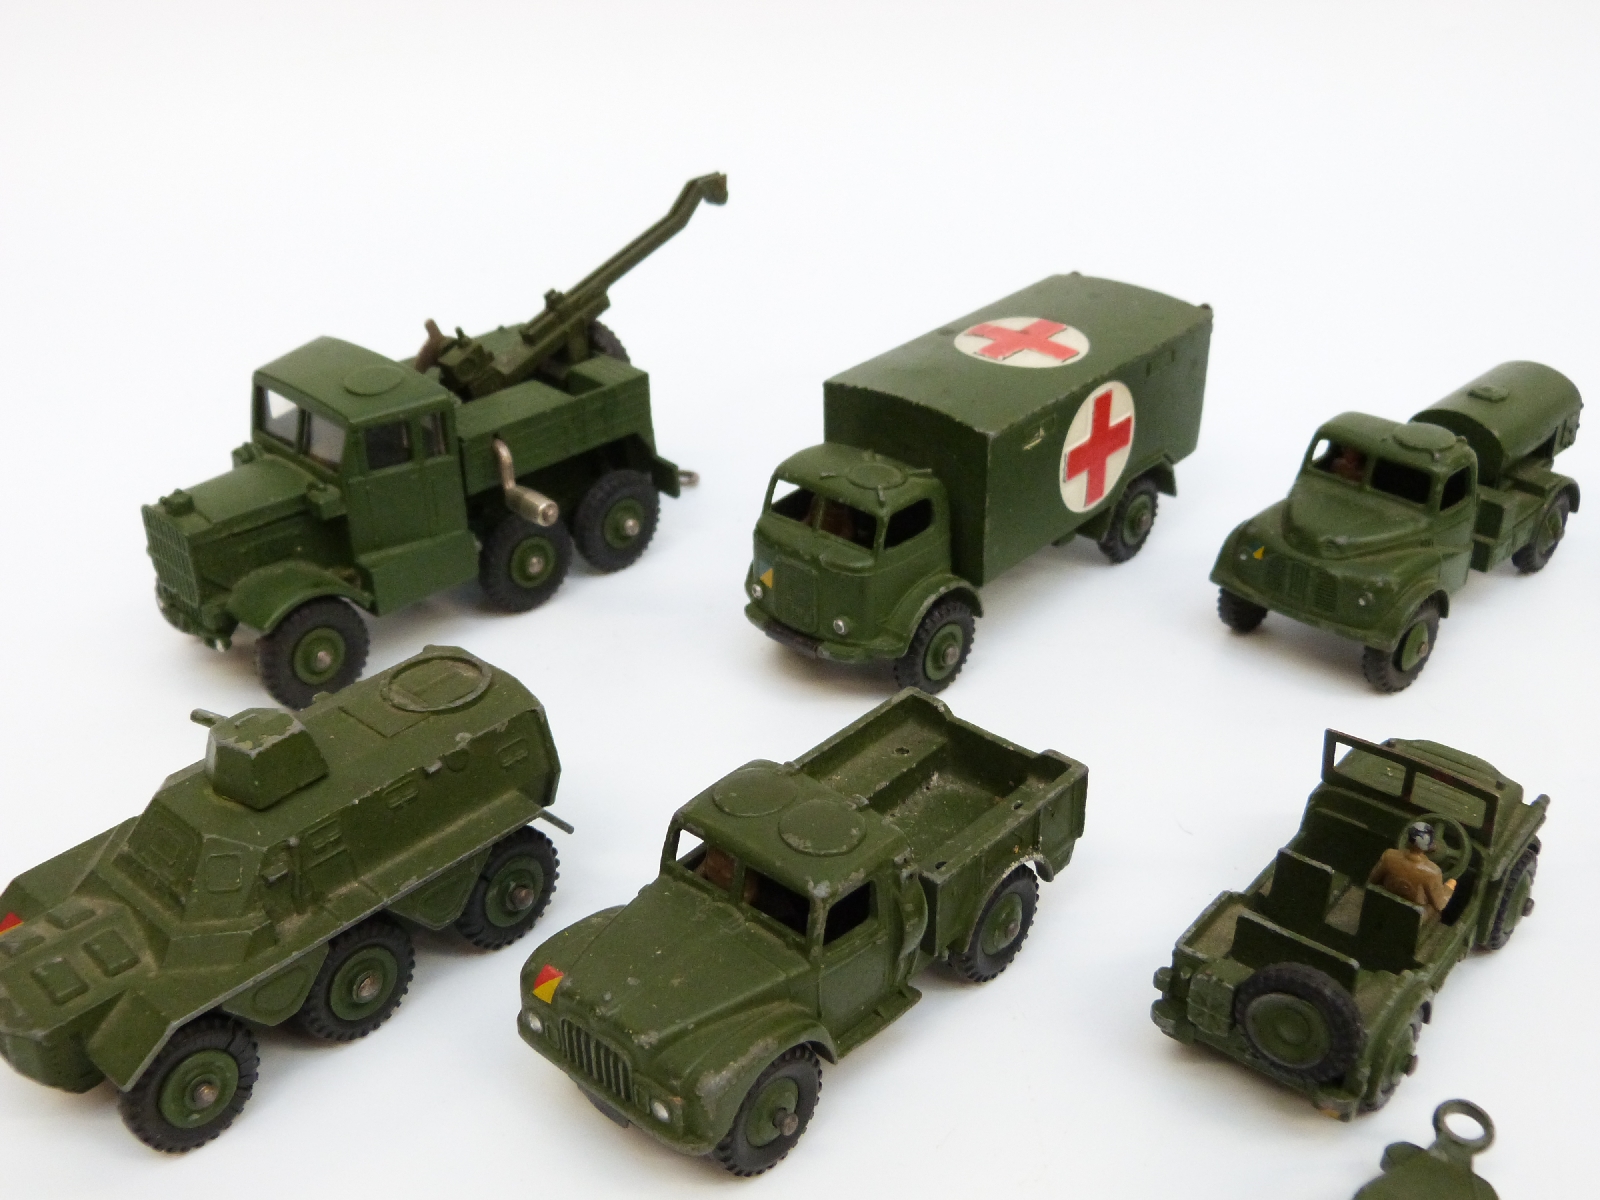 Ten Dinky Toys and Supertoys diecast model military vehicles including Military Ambulance, - Image 6 of 9